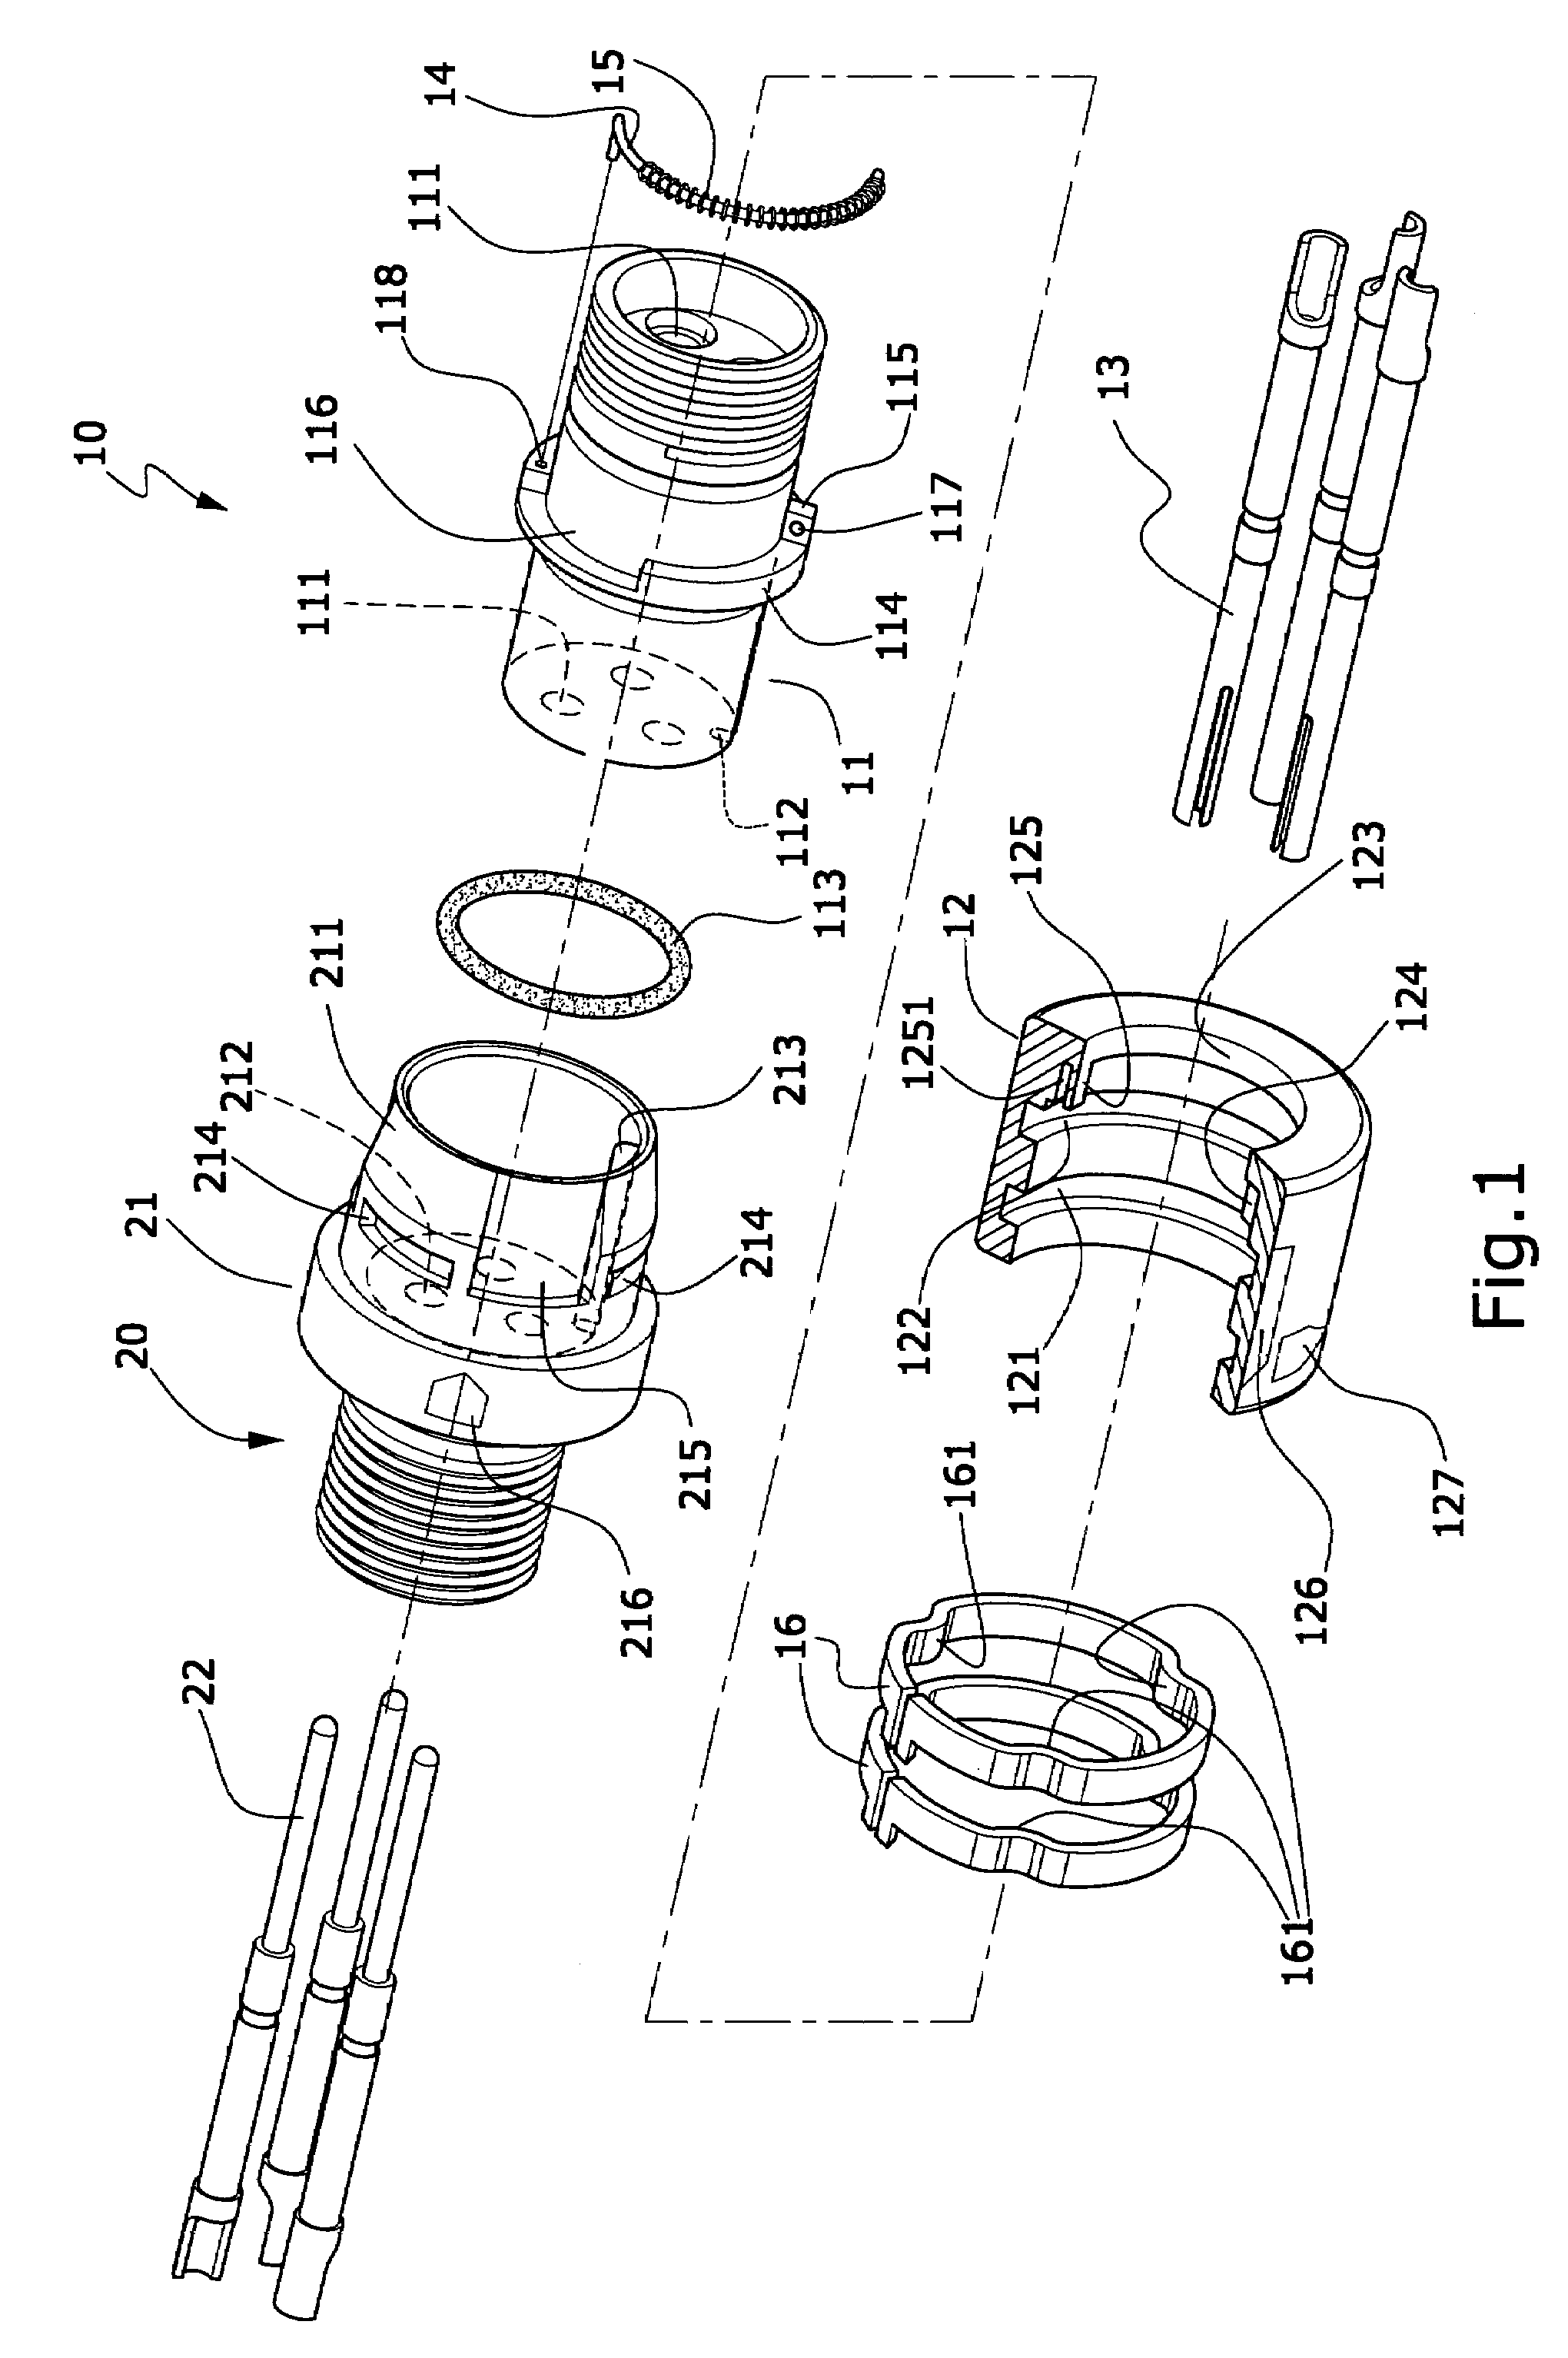 Fast coupling structure of waterproof cable connector